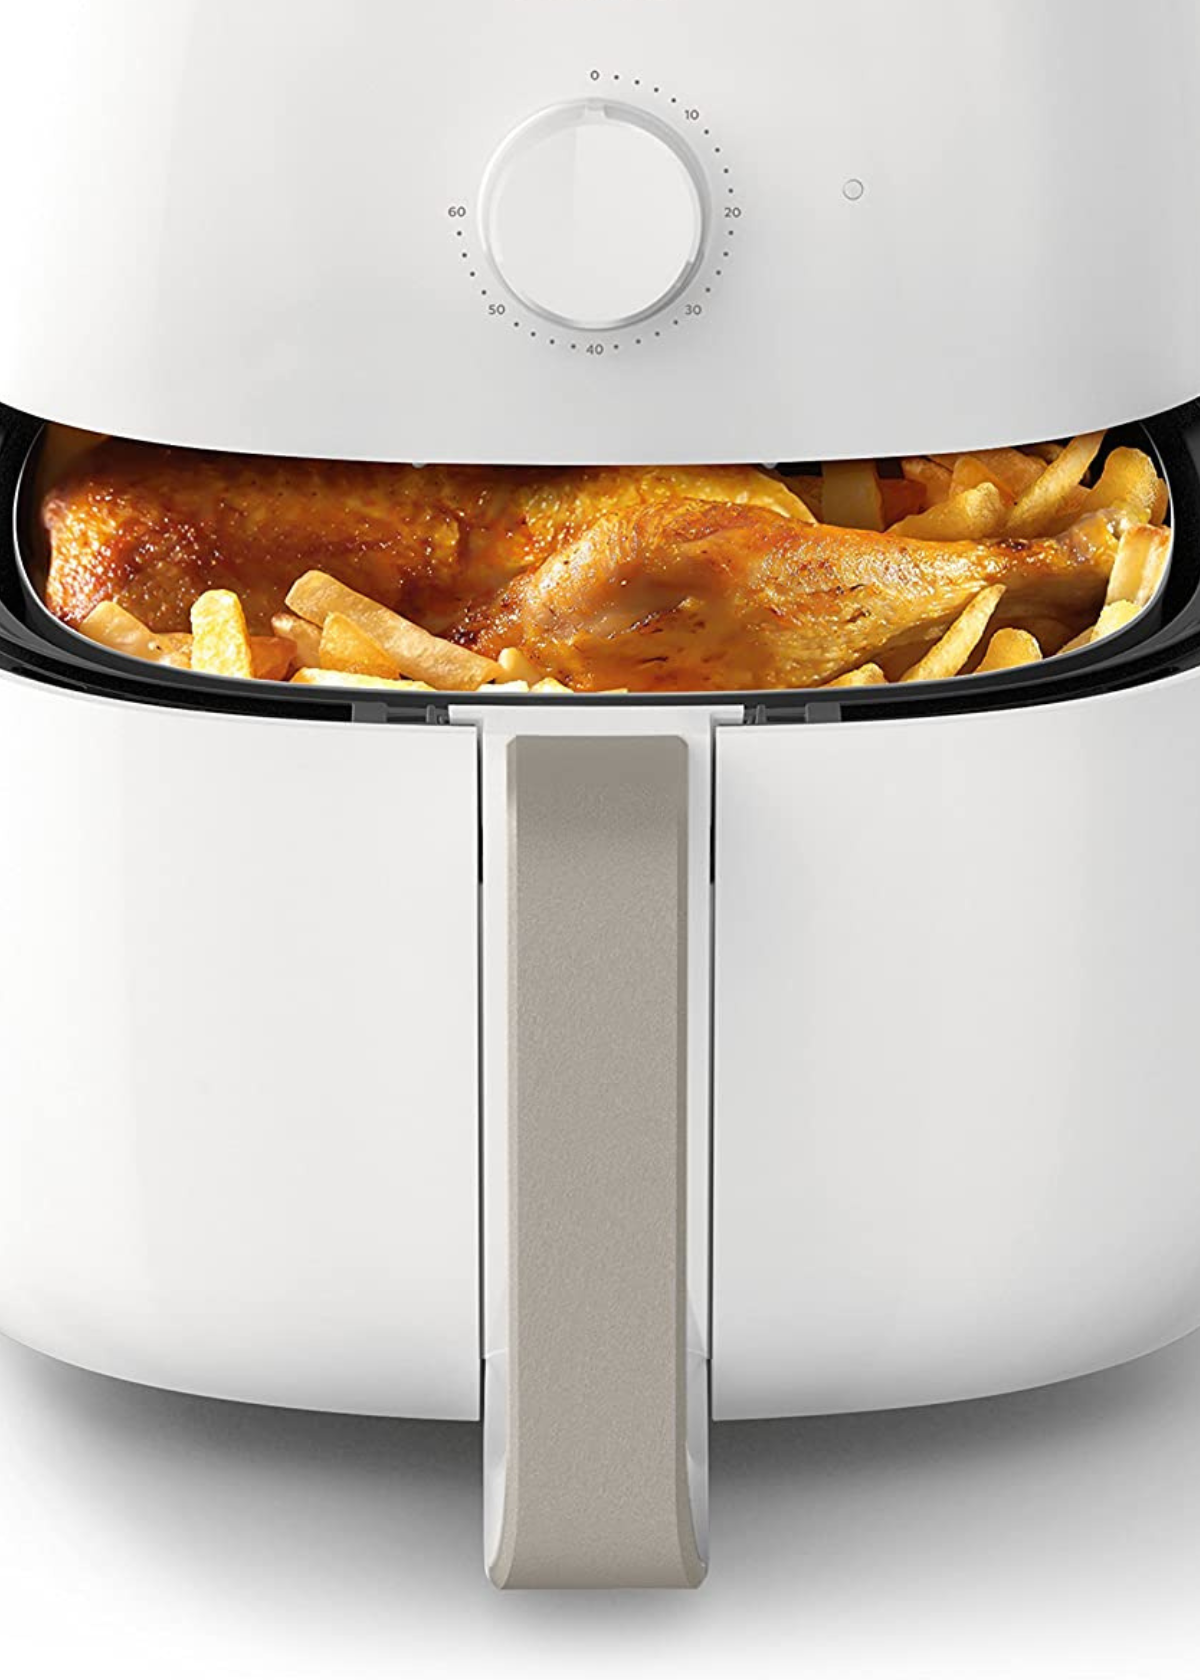 4 Picks Of The Best White Air Fryer: A Touch Of Elegance To Your Kitchen